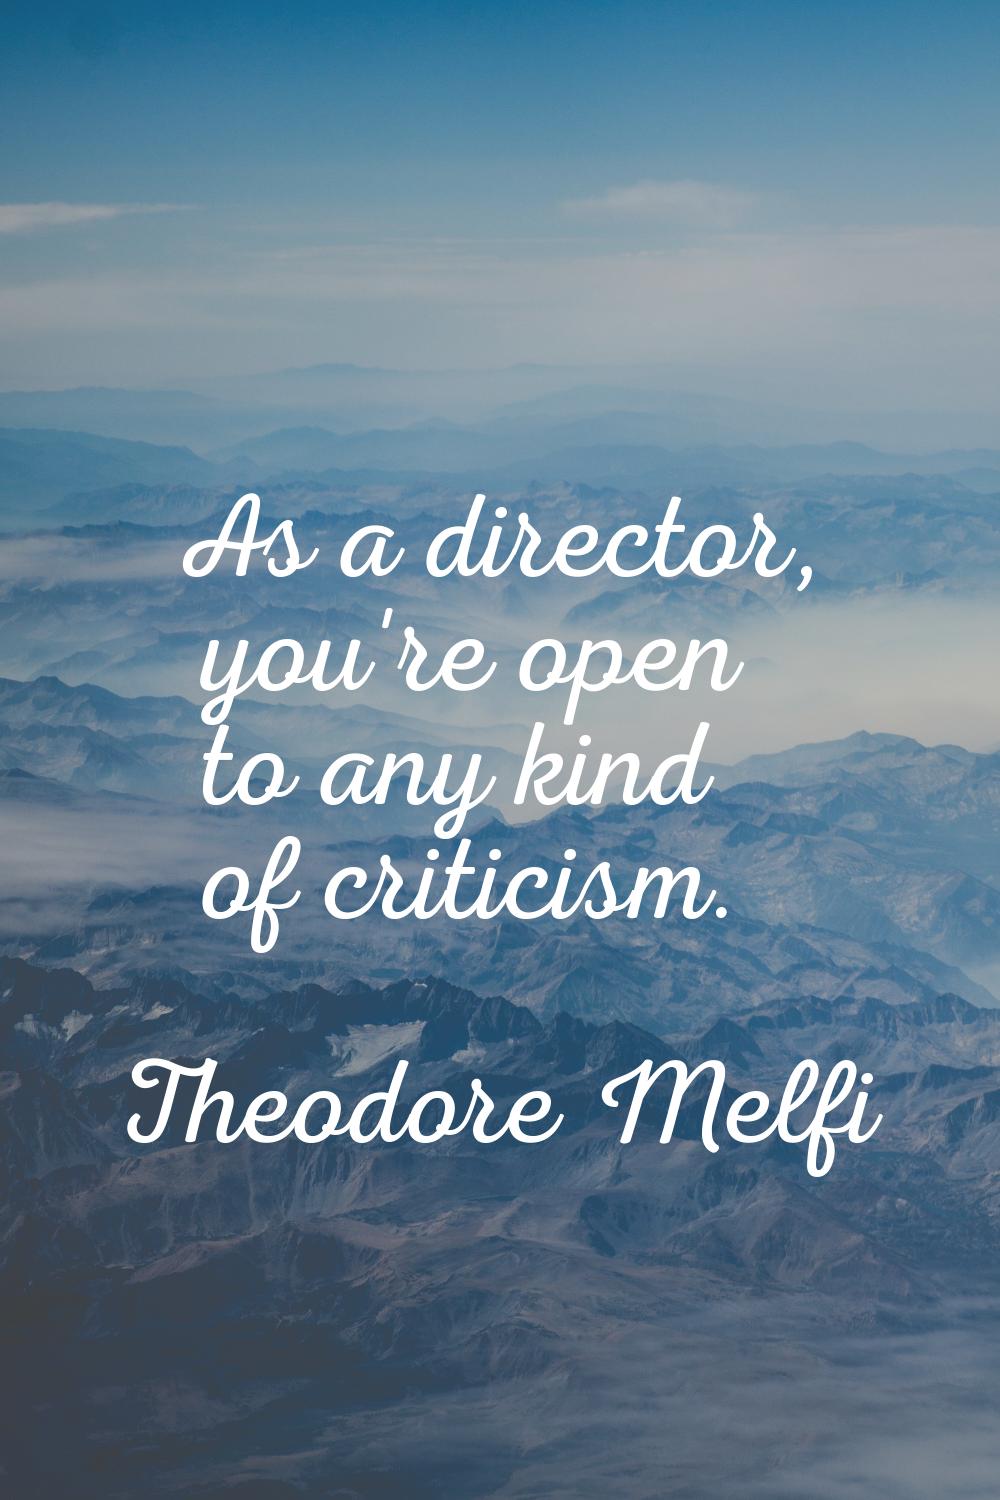 As a director, you're open to any kind of criticism.